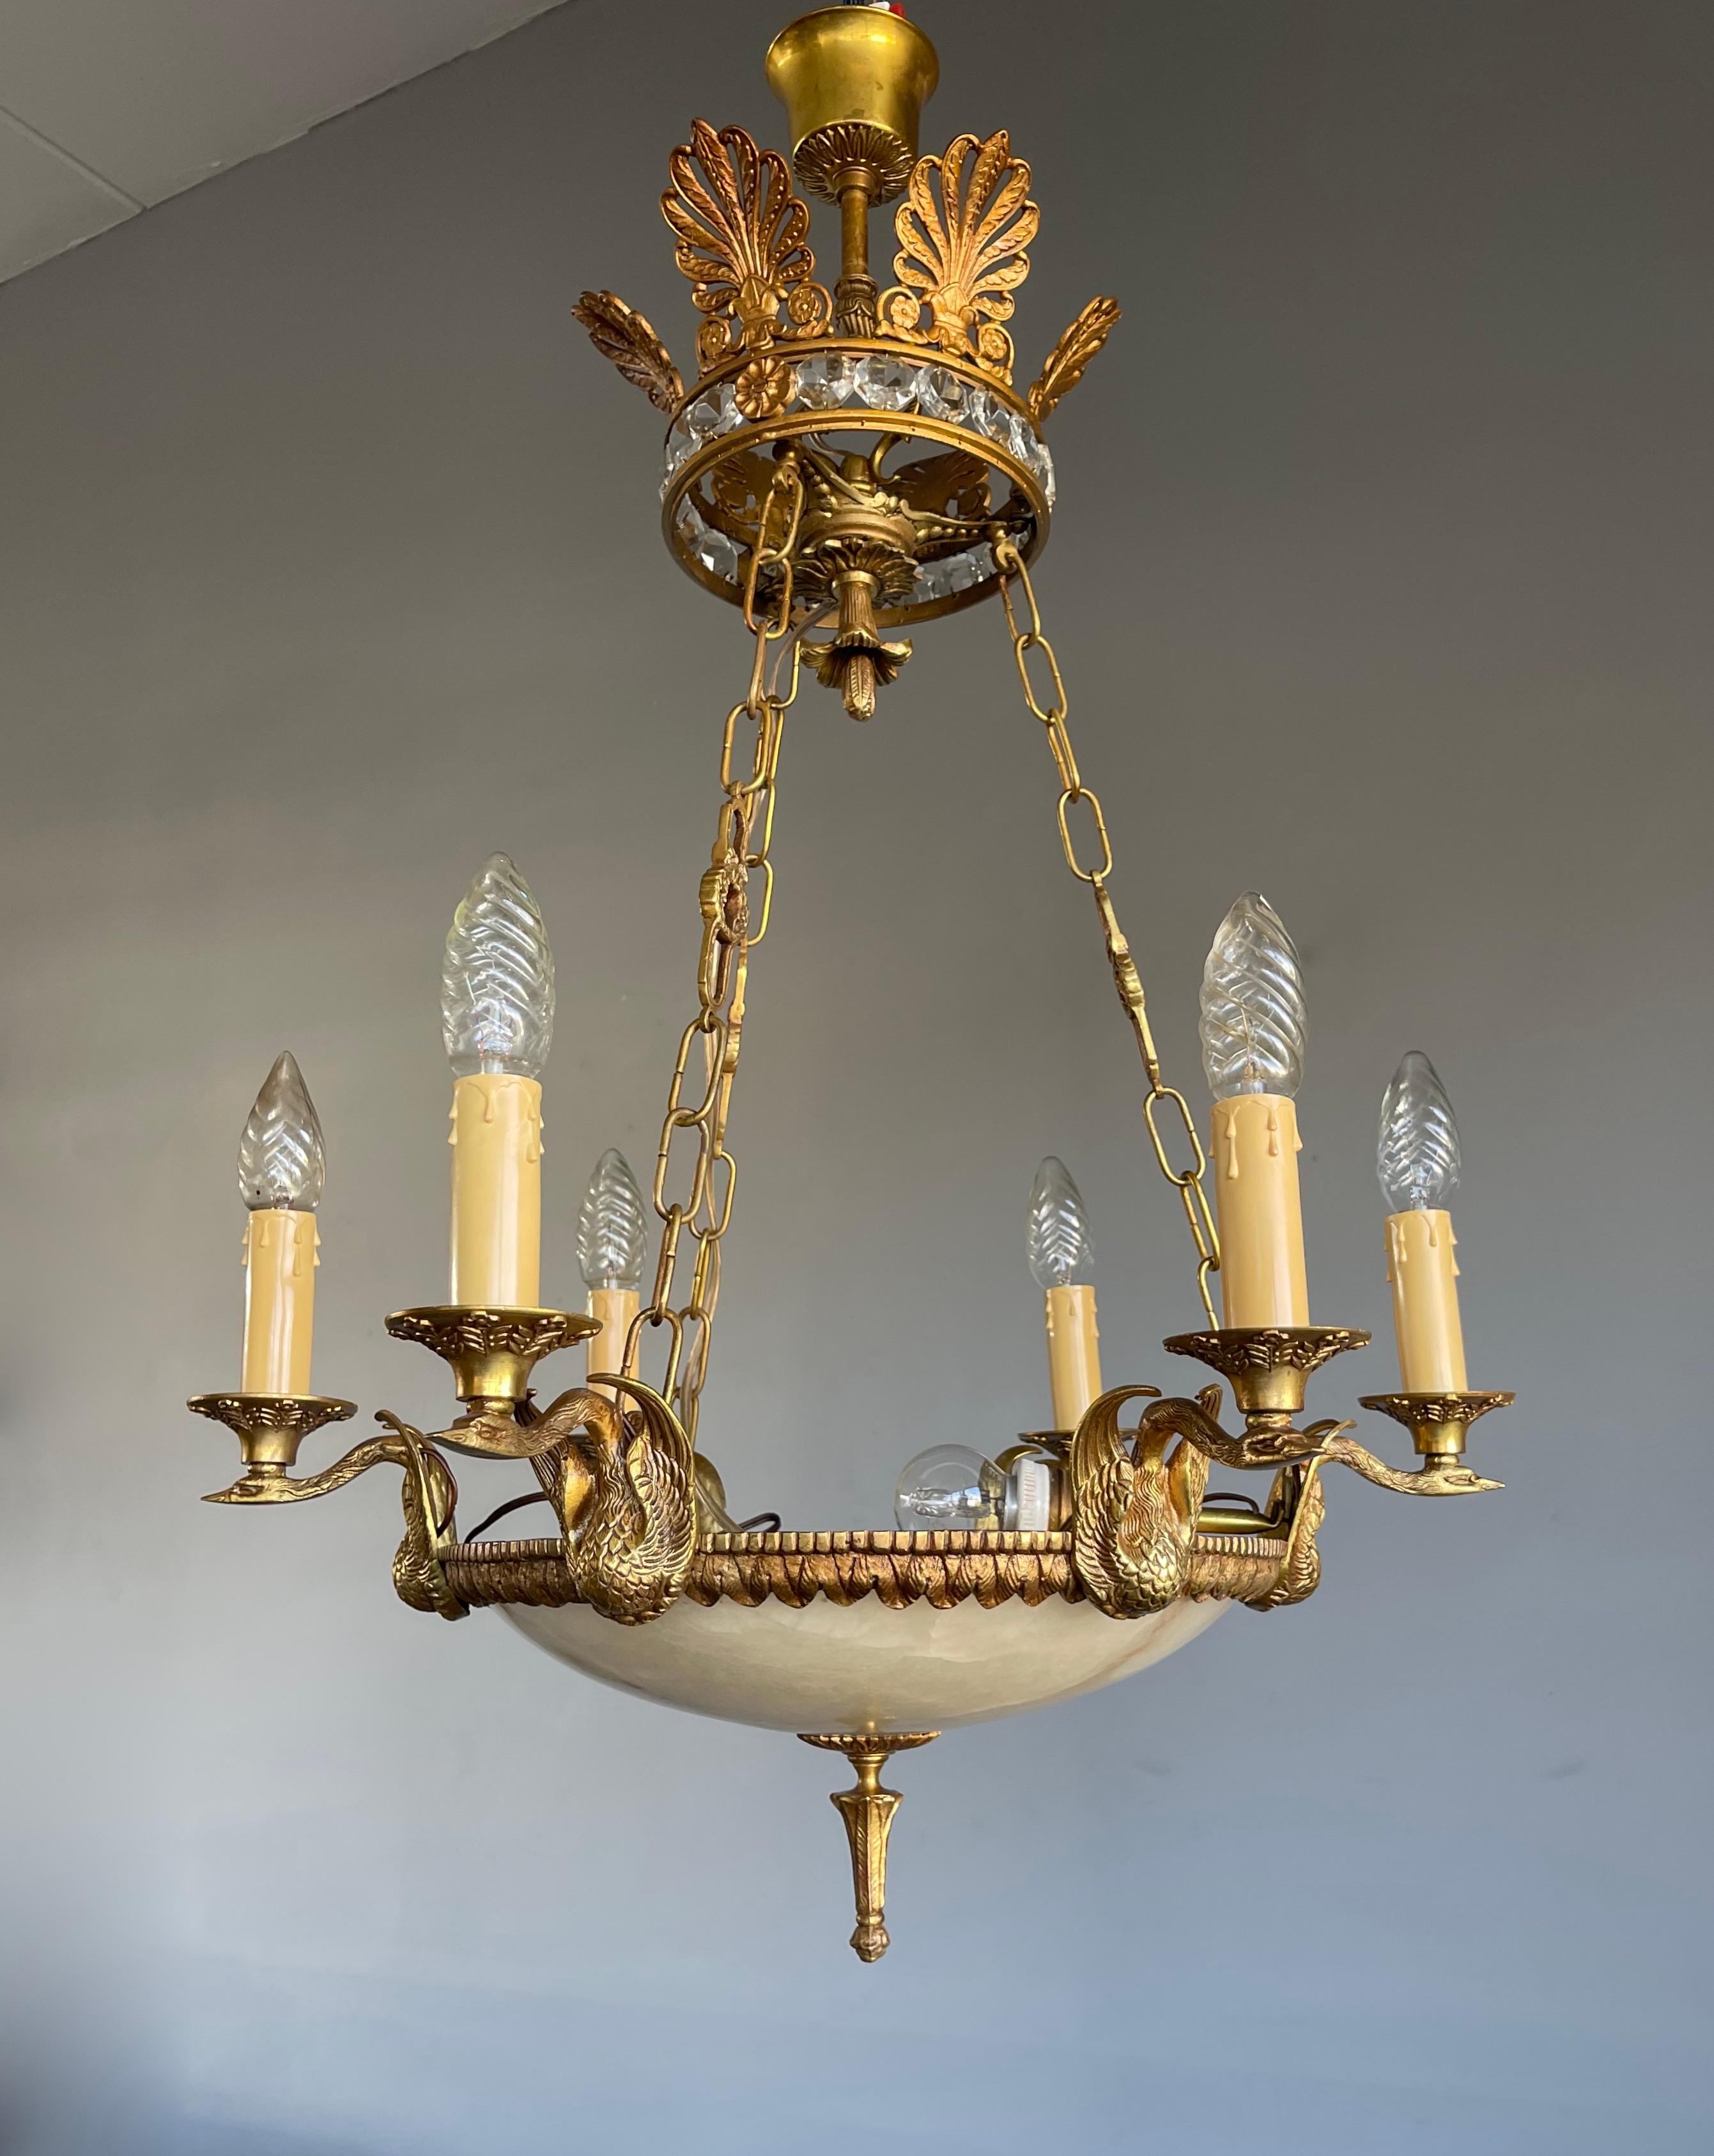 Stunning little 7-light chandelier with gilt bronze swan sculptures.

If you are looking for a truly stylish, well proportioned and finest quality light fixture then this circa 1940s work of lighting art could be perfect for you. The overall design,